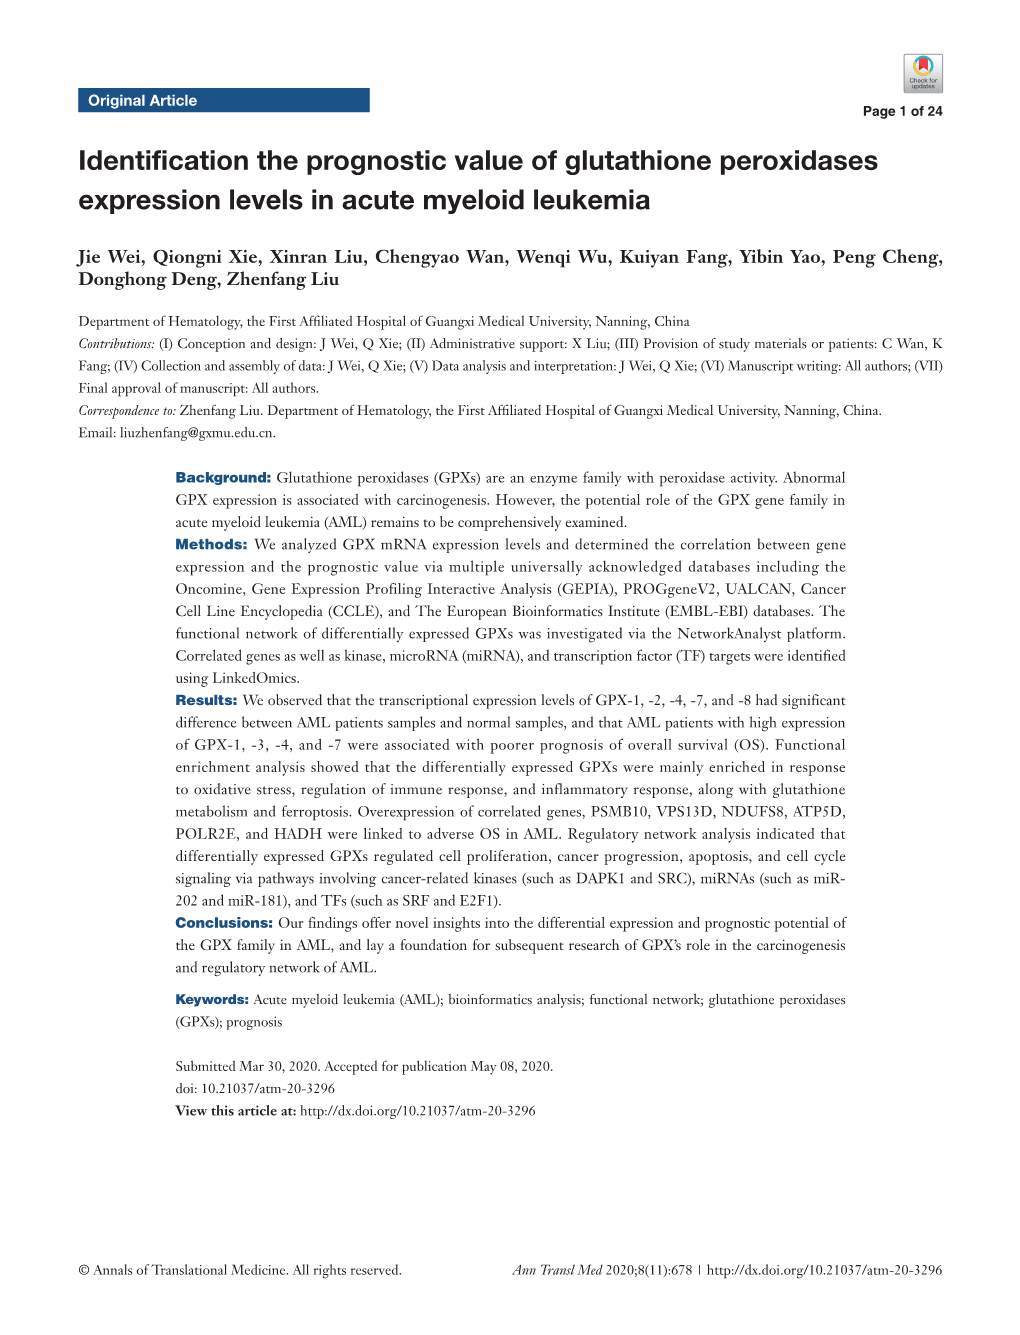 Identification the Prognostic Value of Glutathione Peroxidases Expression Levels in Acute Myeloid Leukemia